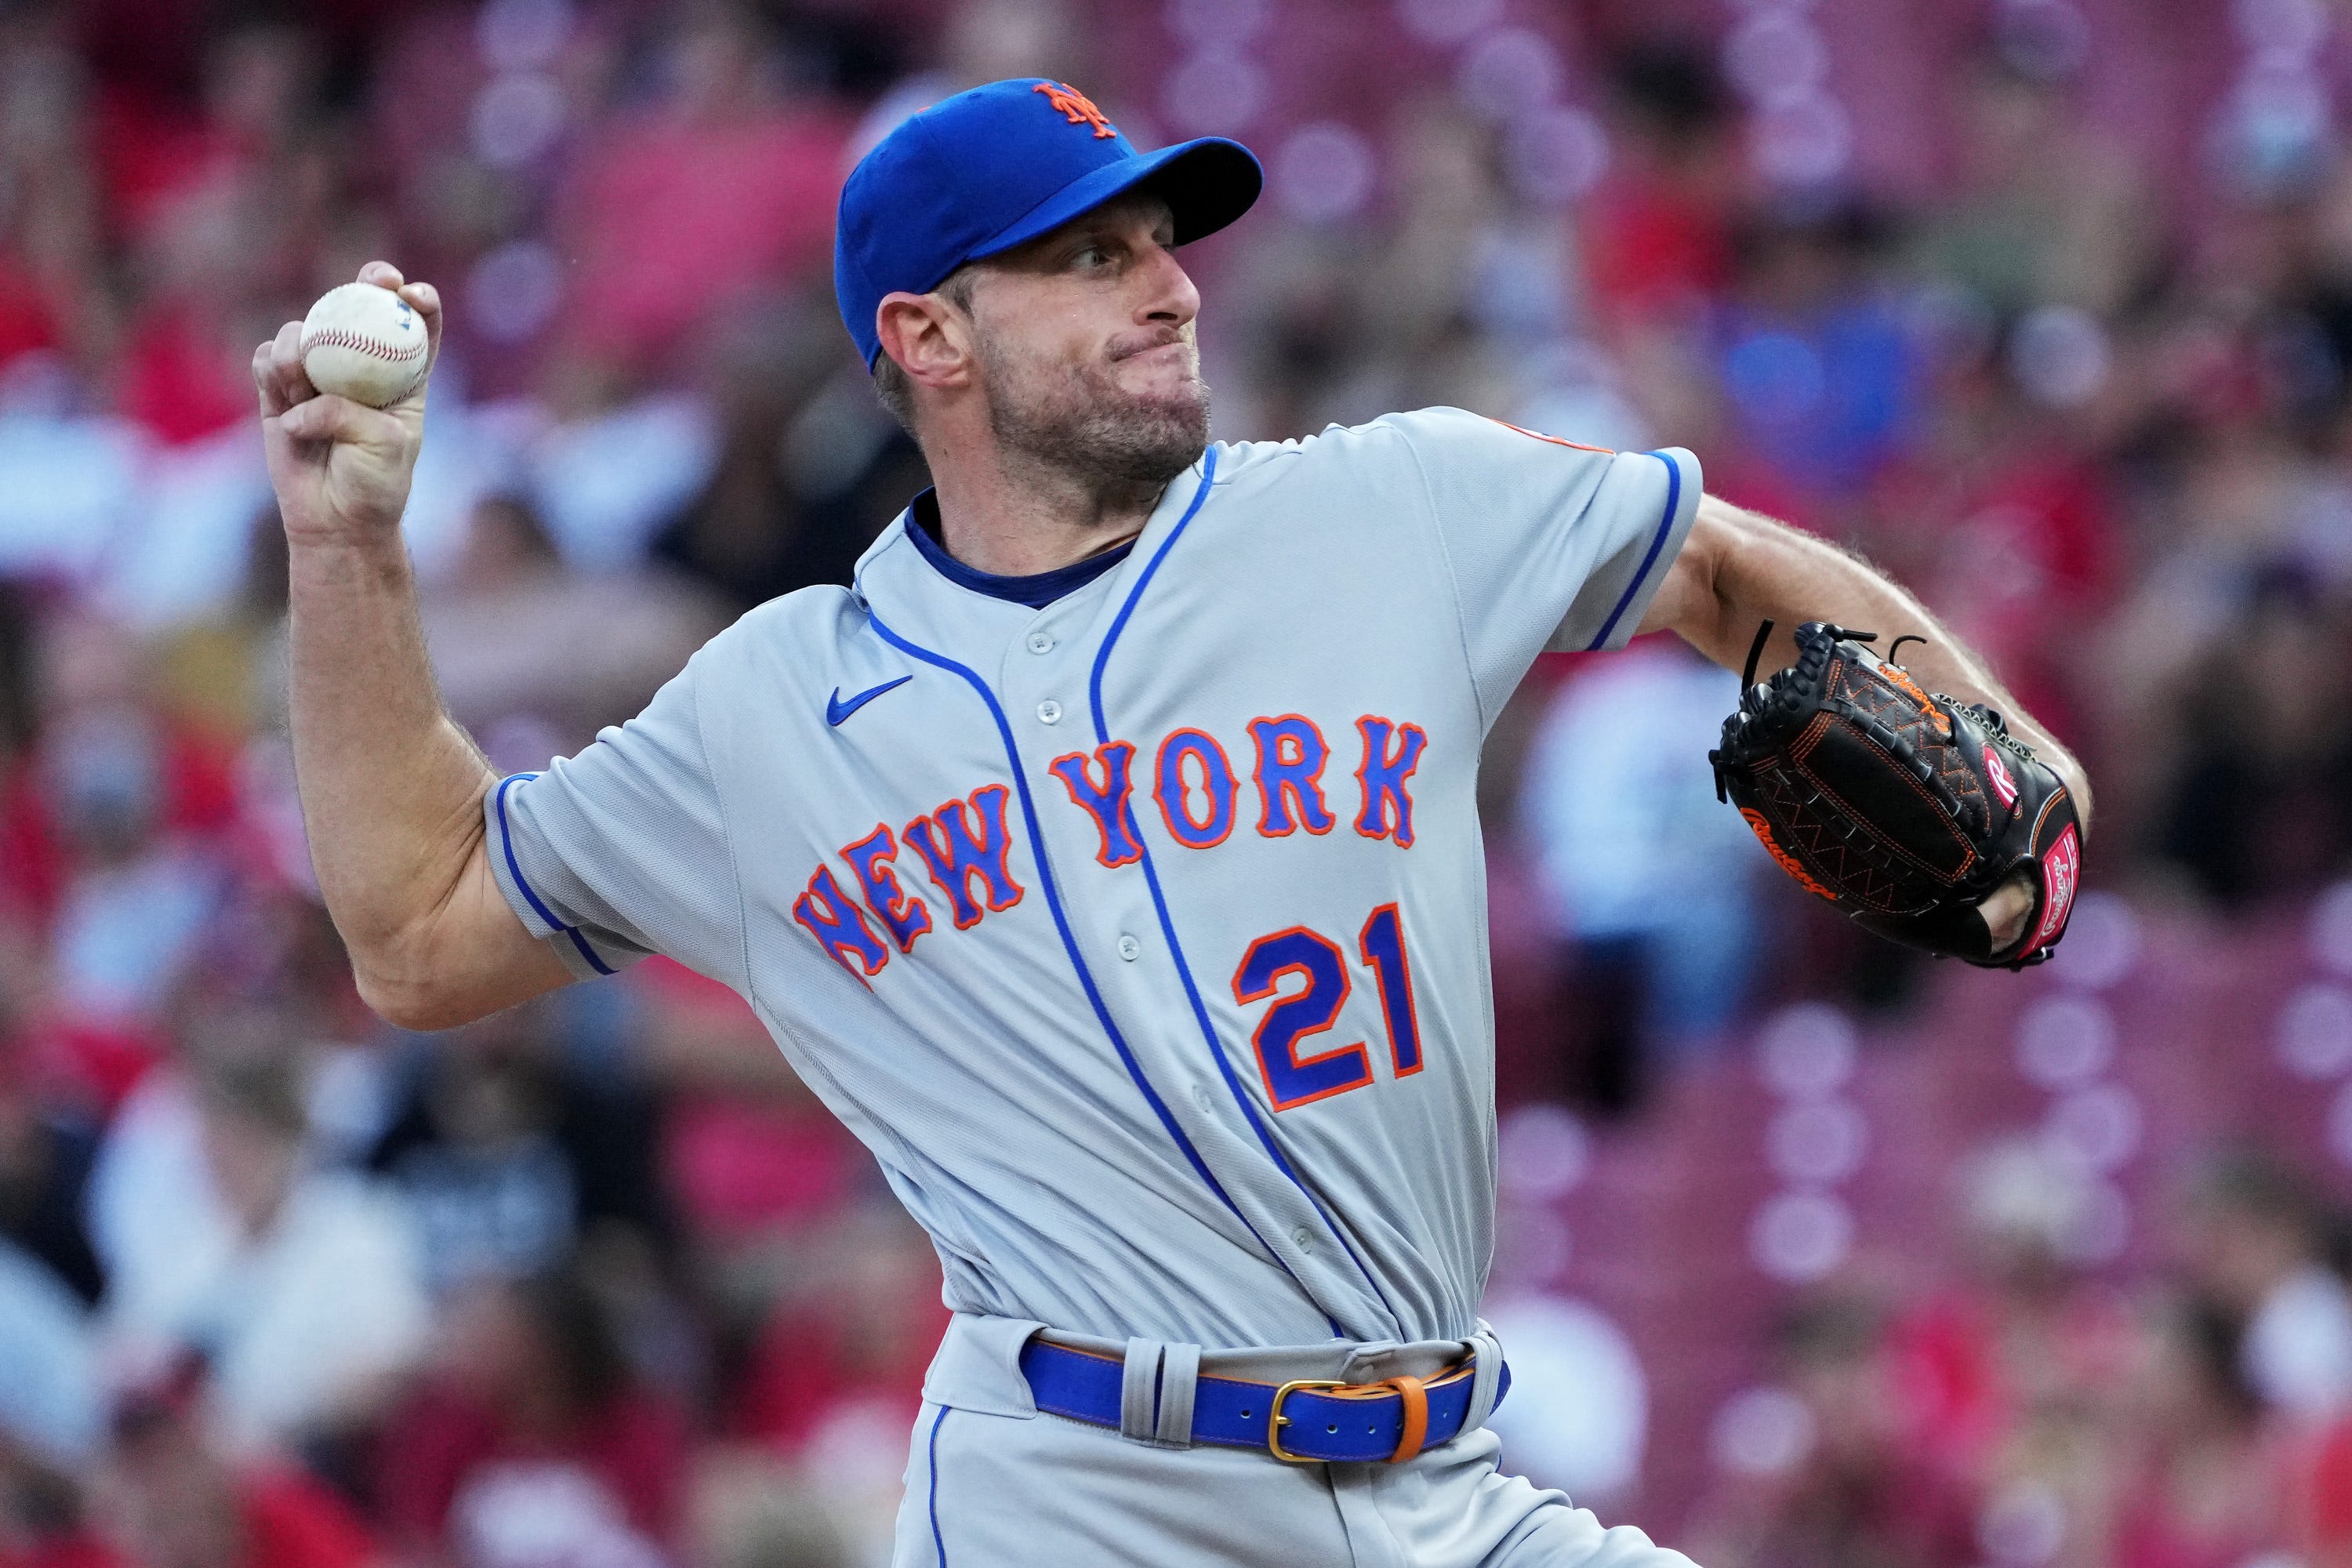 Marlins Beat Mets as Dormant Bats Wake Up Against Jacob deGrom